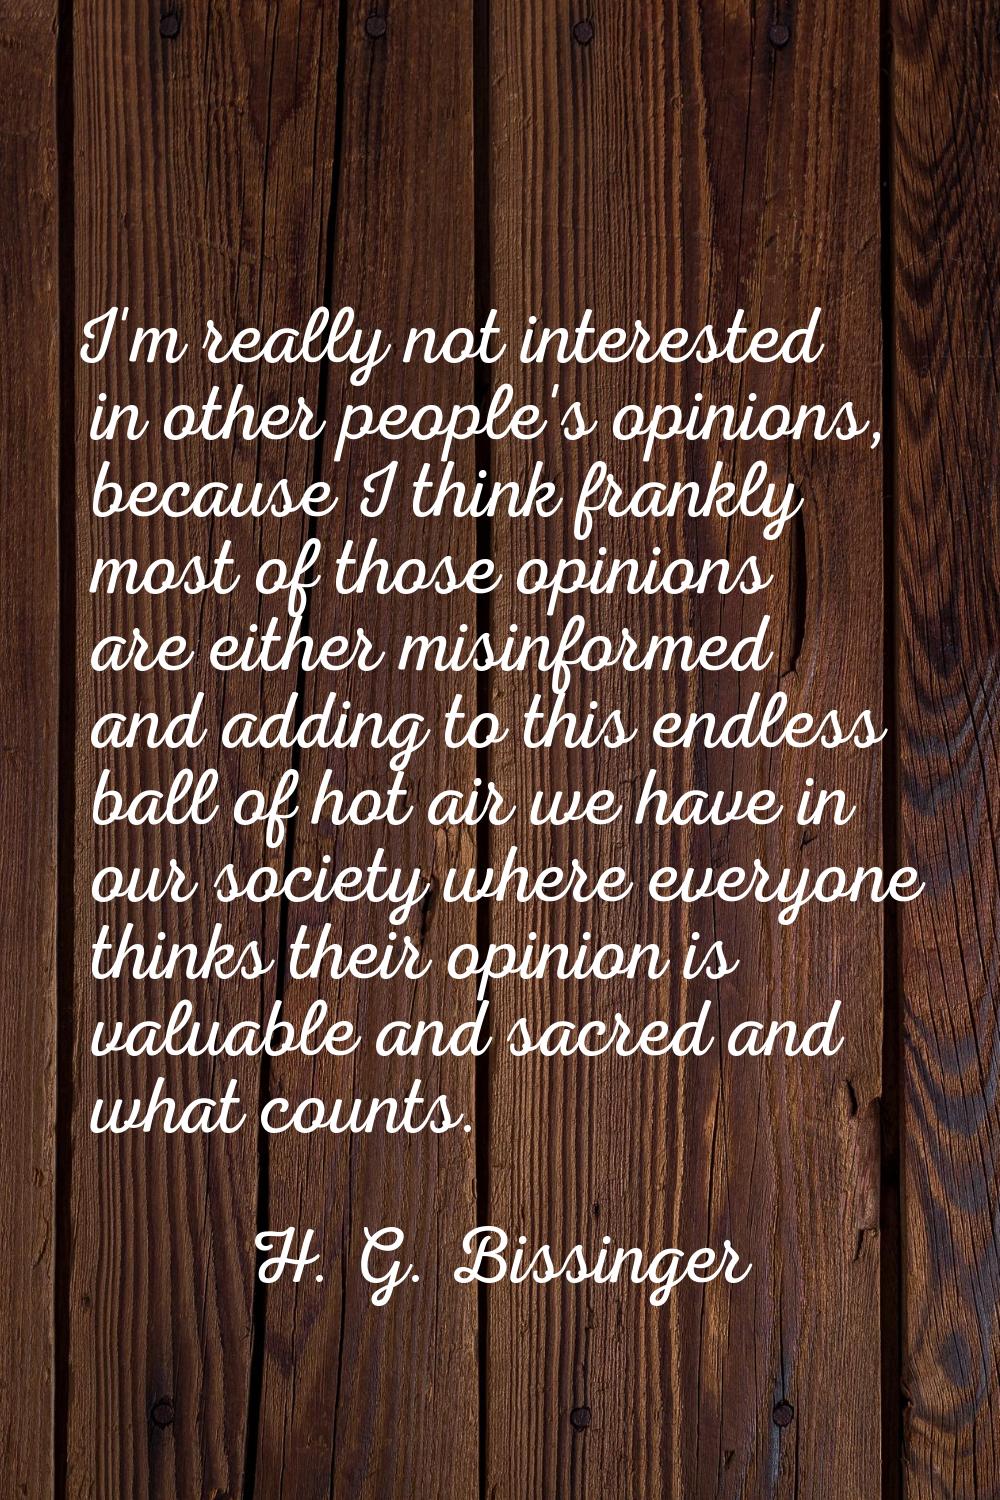 I'm really not interested in other people's opinions, because I think frankly most of those opinion